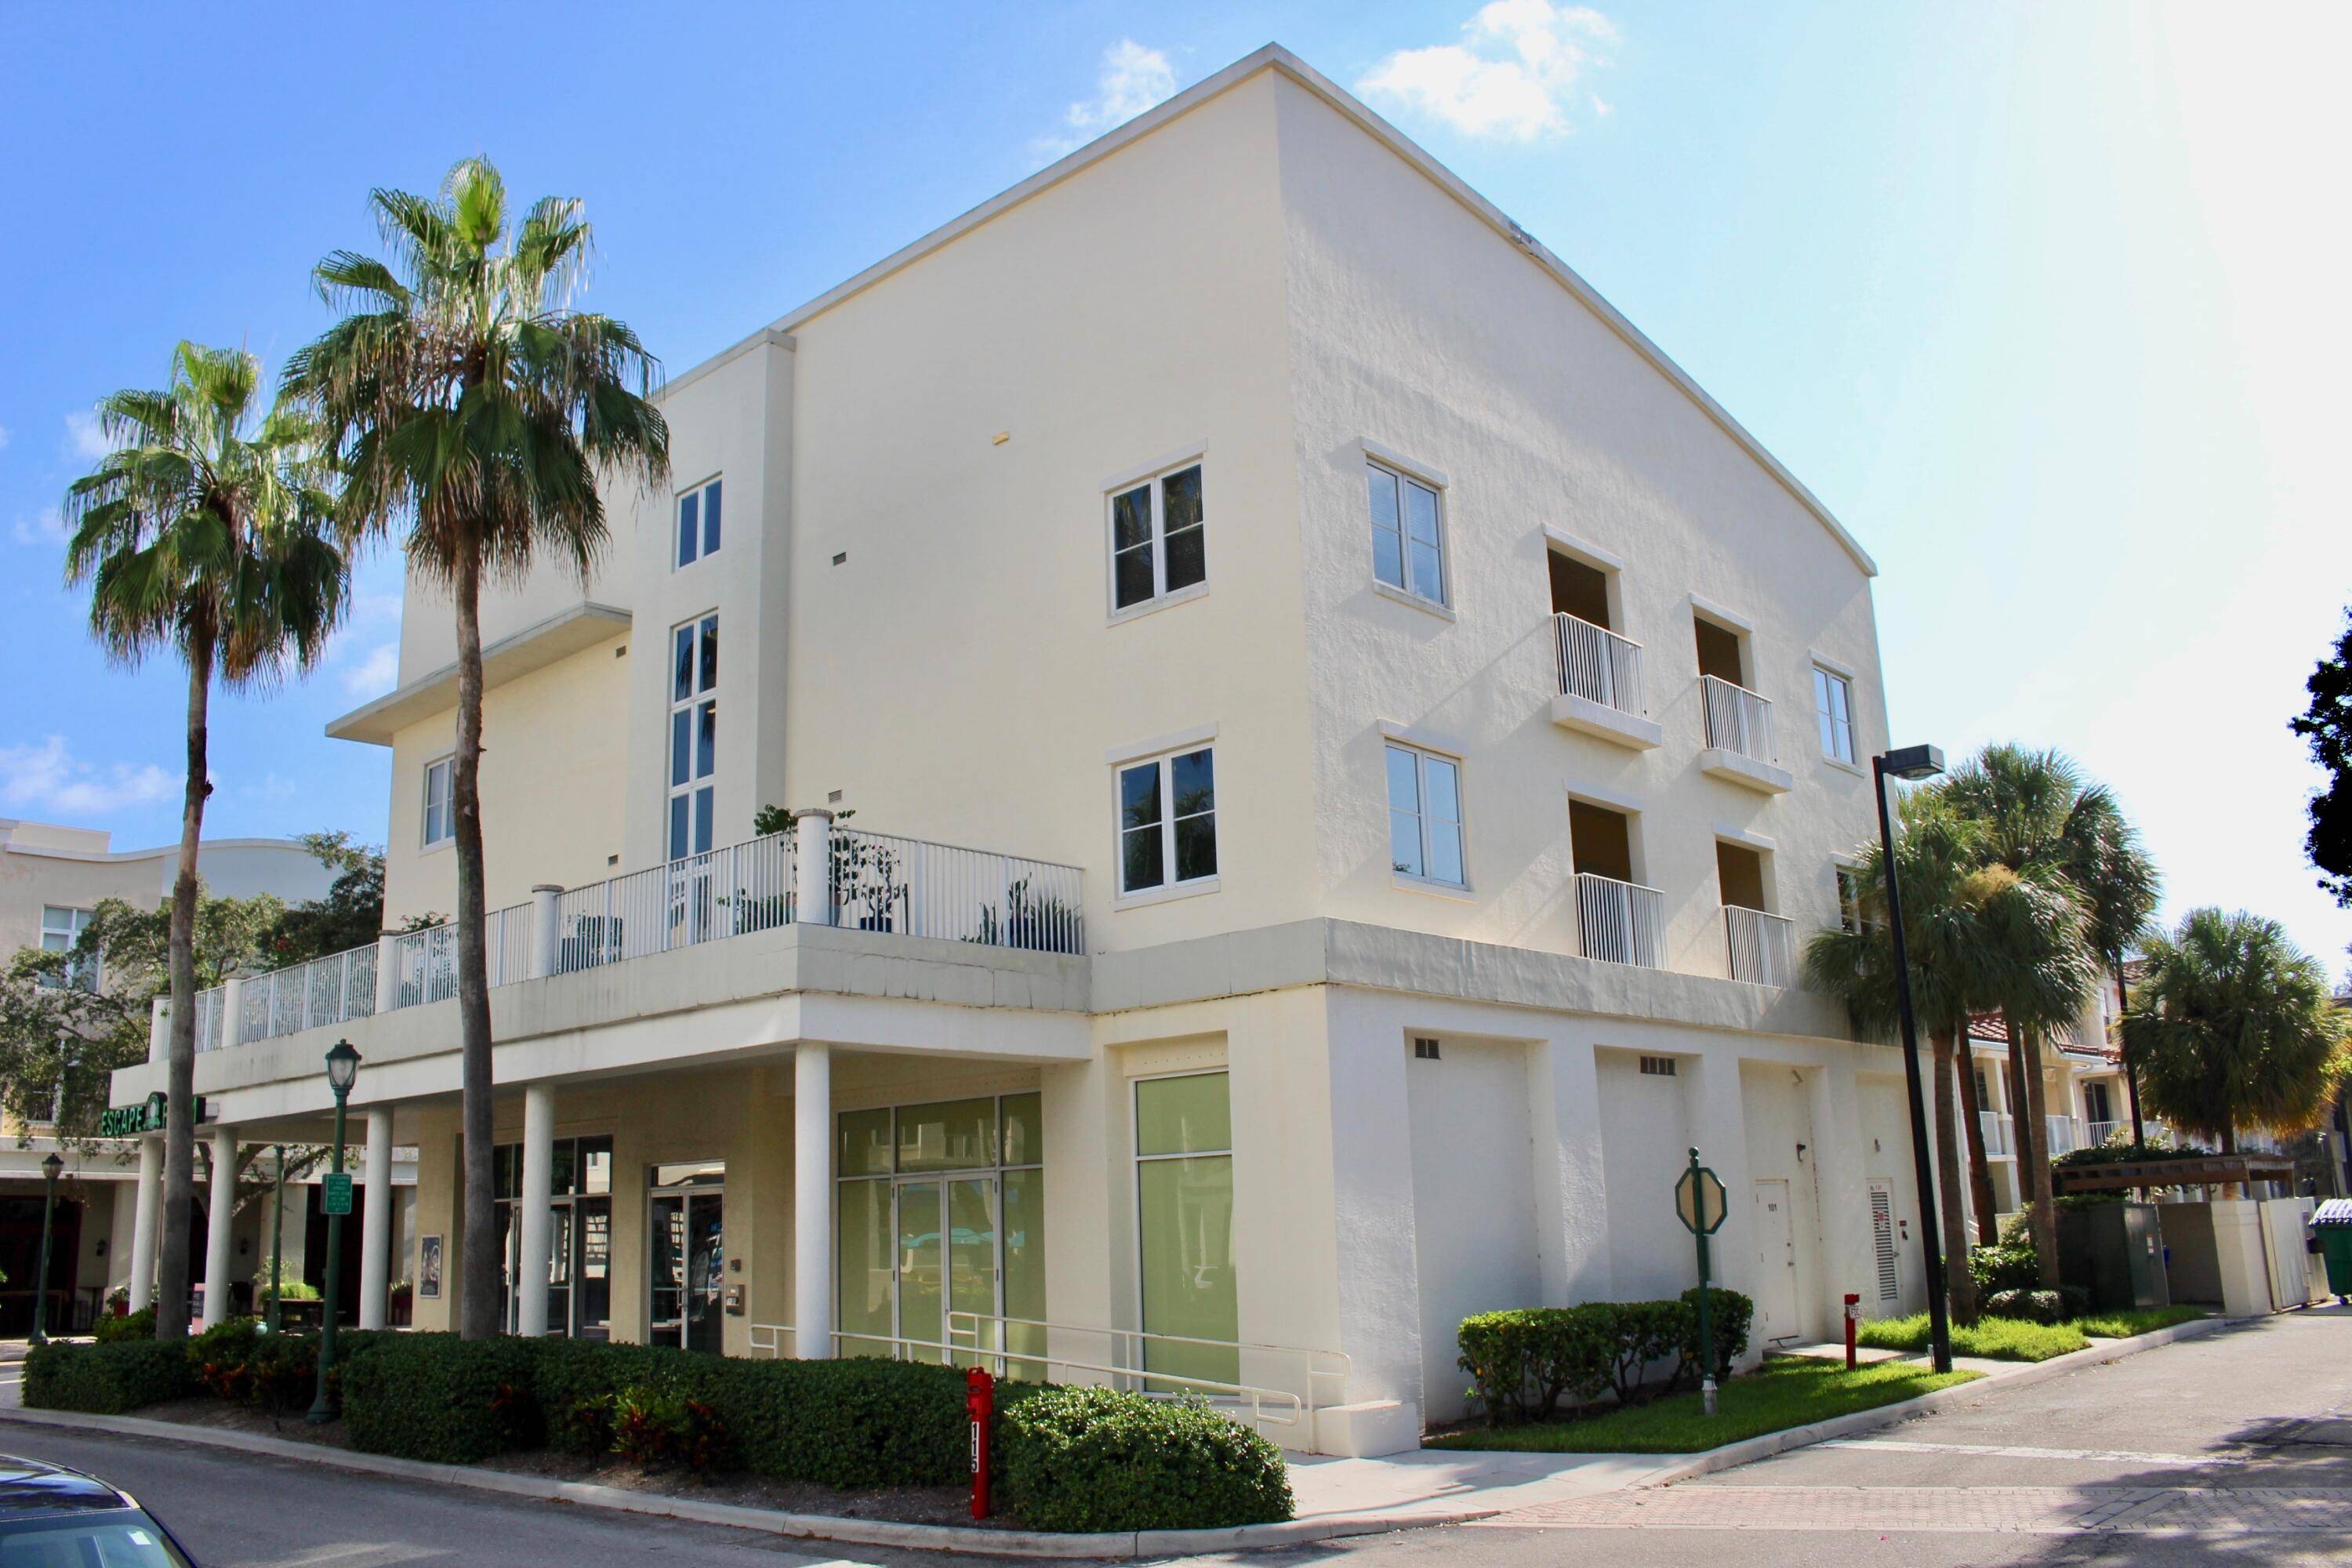 Enjoy the season in the HEART of downtown Abacoa, in this 3 bedroom, 2 bath, condo with your own private covered balcony, great for entertaining.